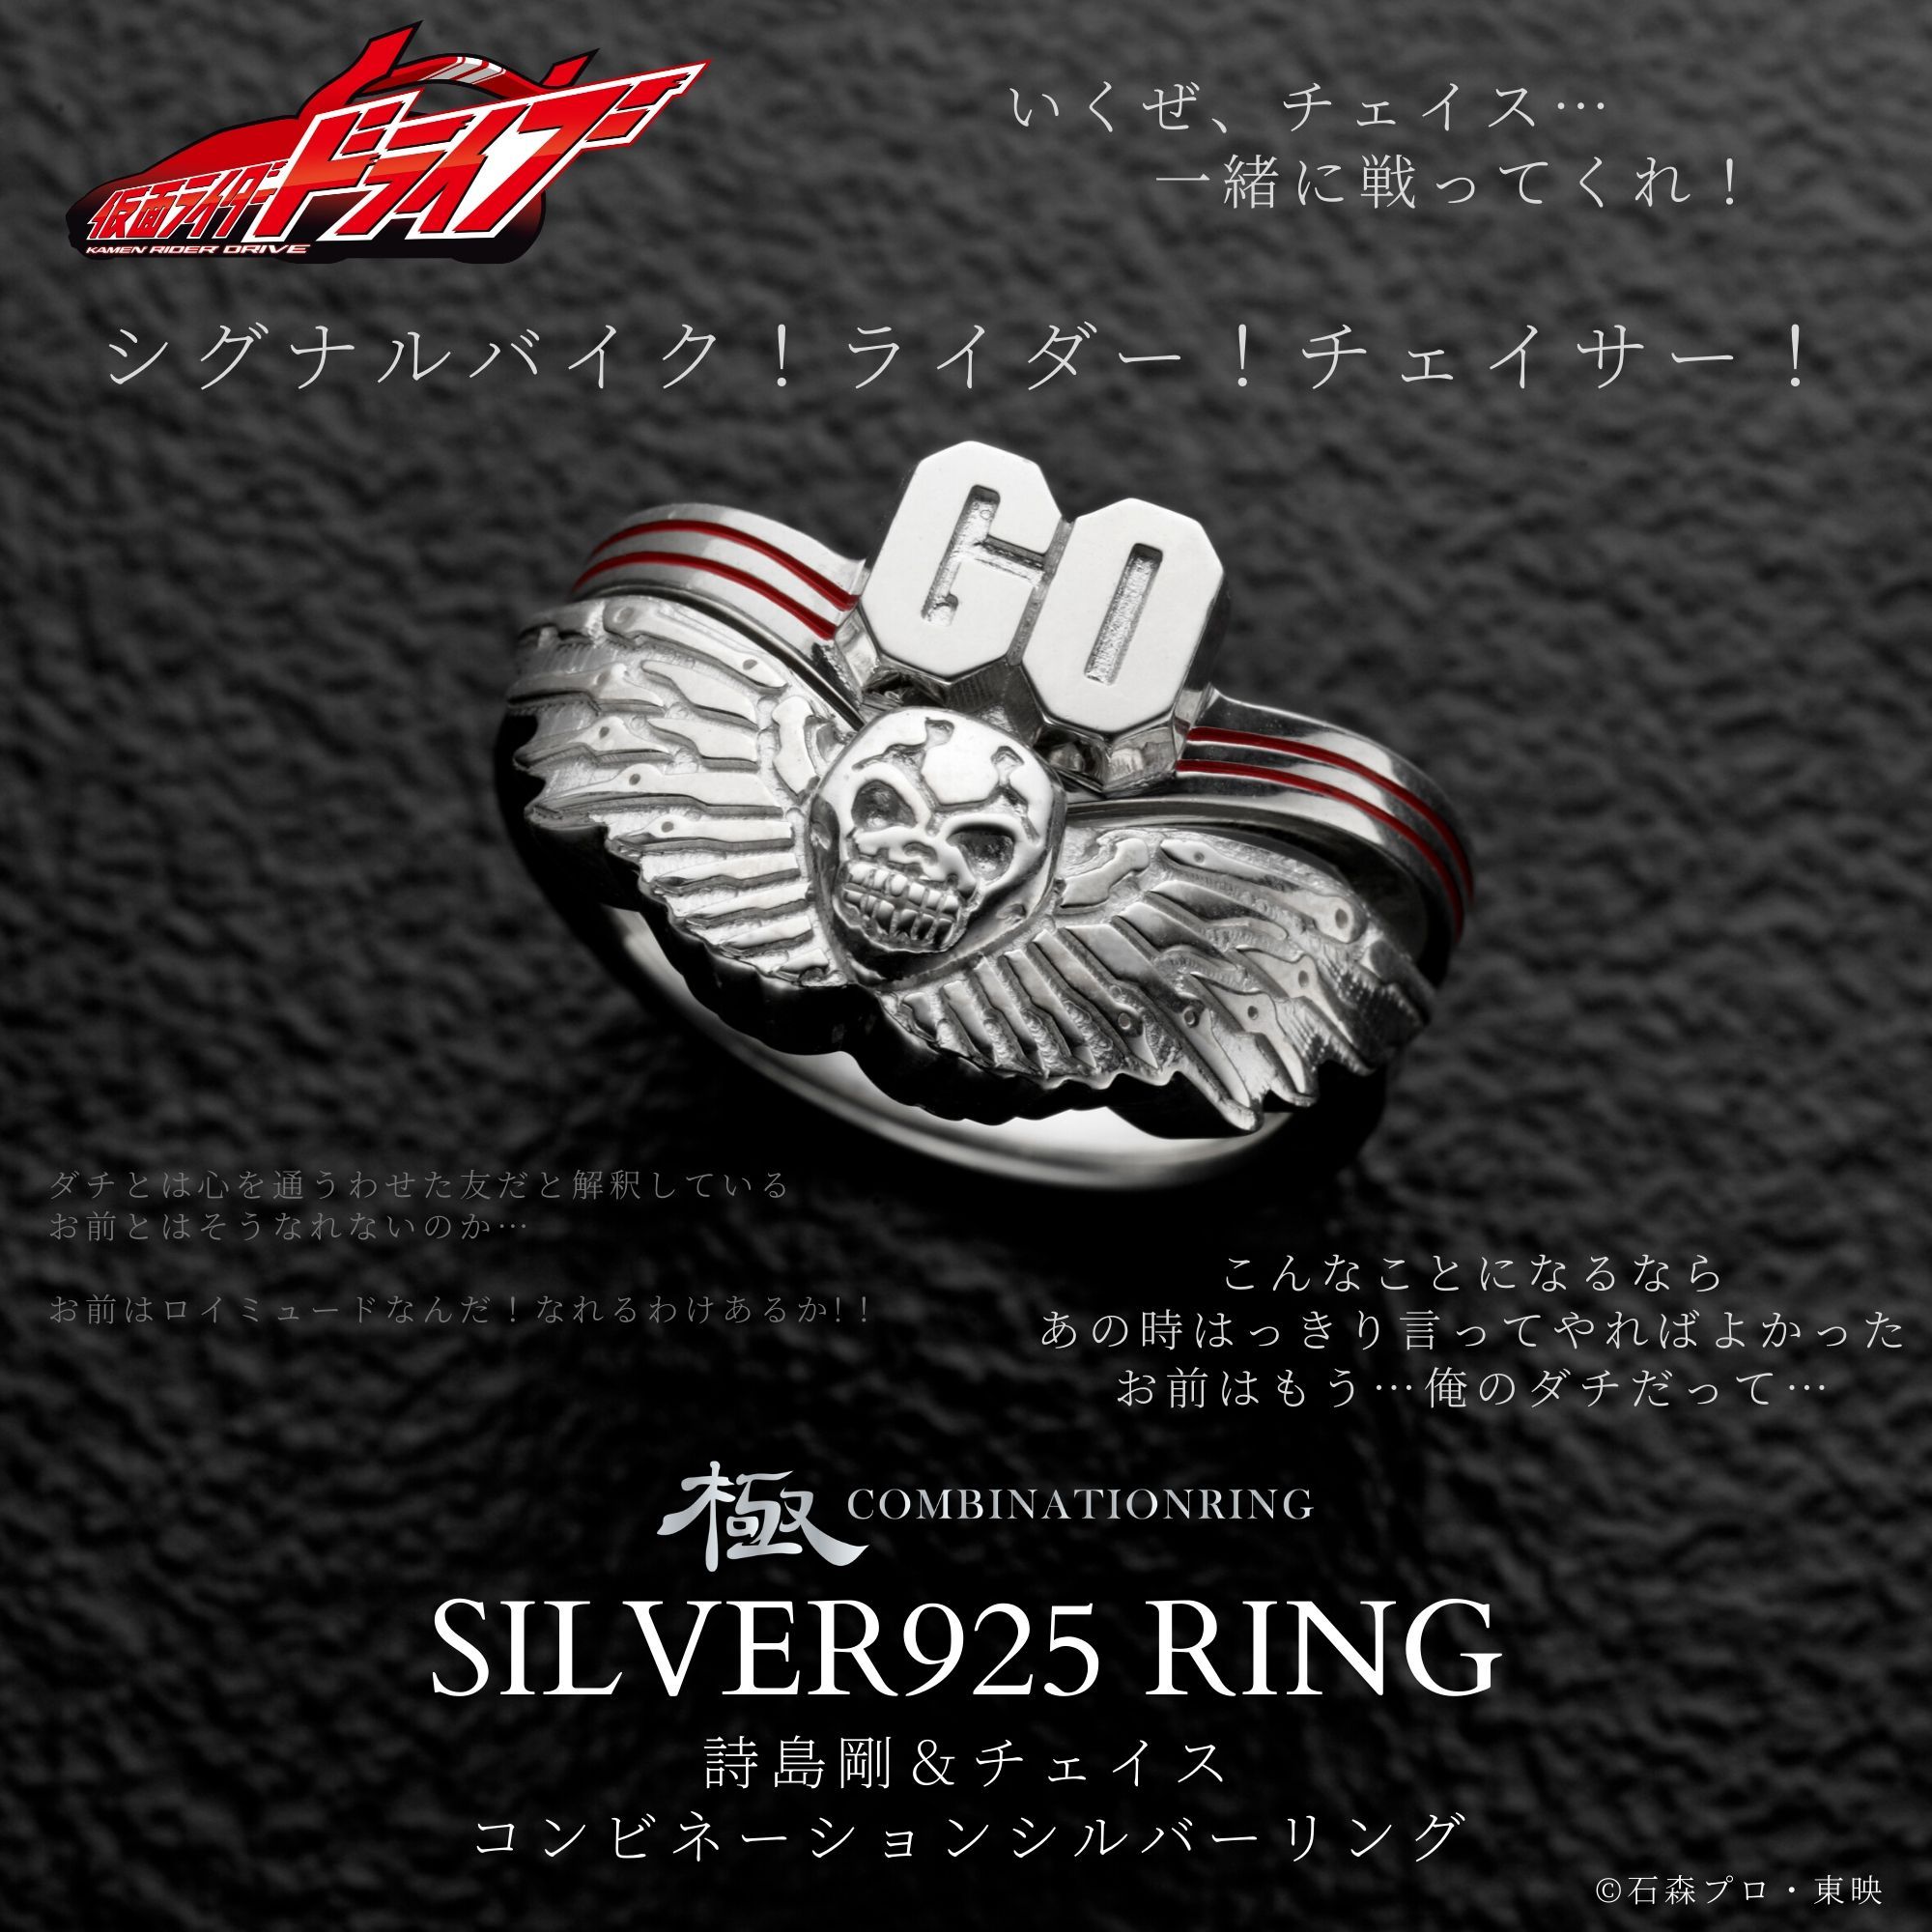 Go Shijima and Chase Combined Ring—Kamen Rider Drive